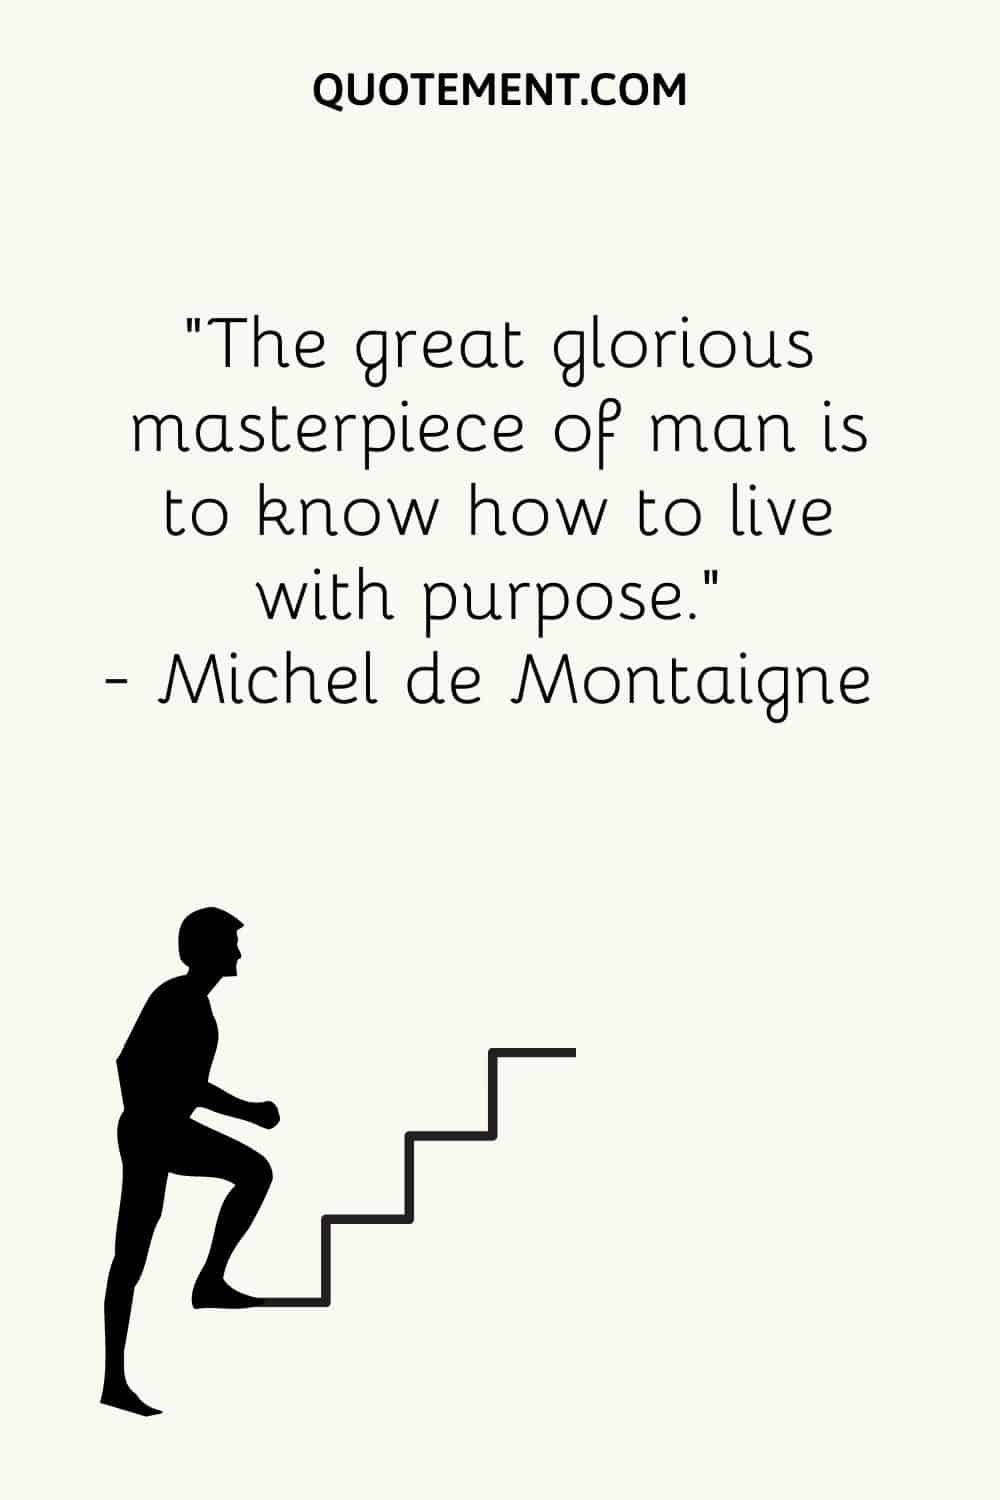 illustration of a guy climbing stairs representing achieving goals quote